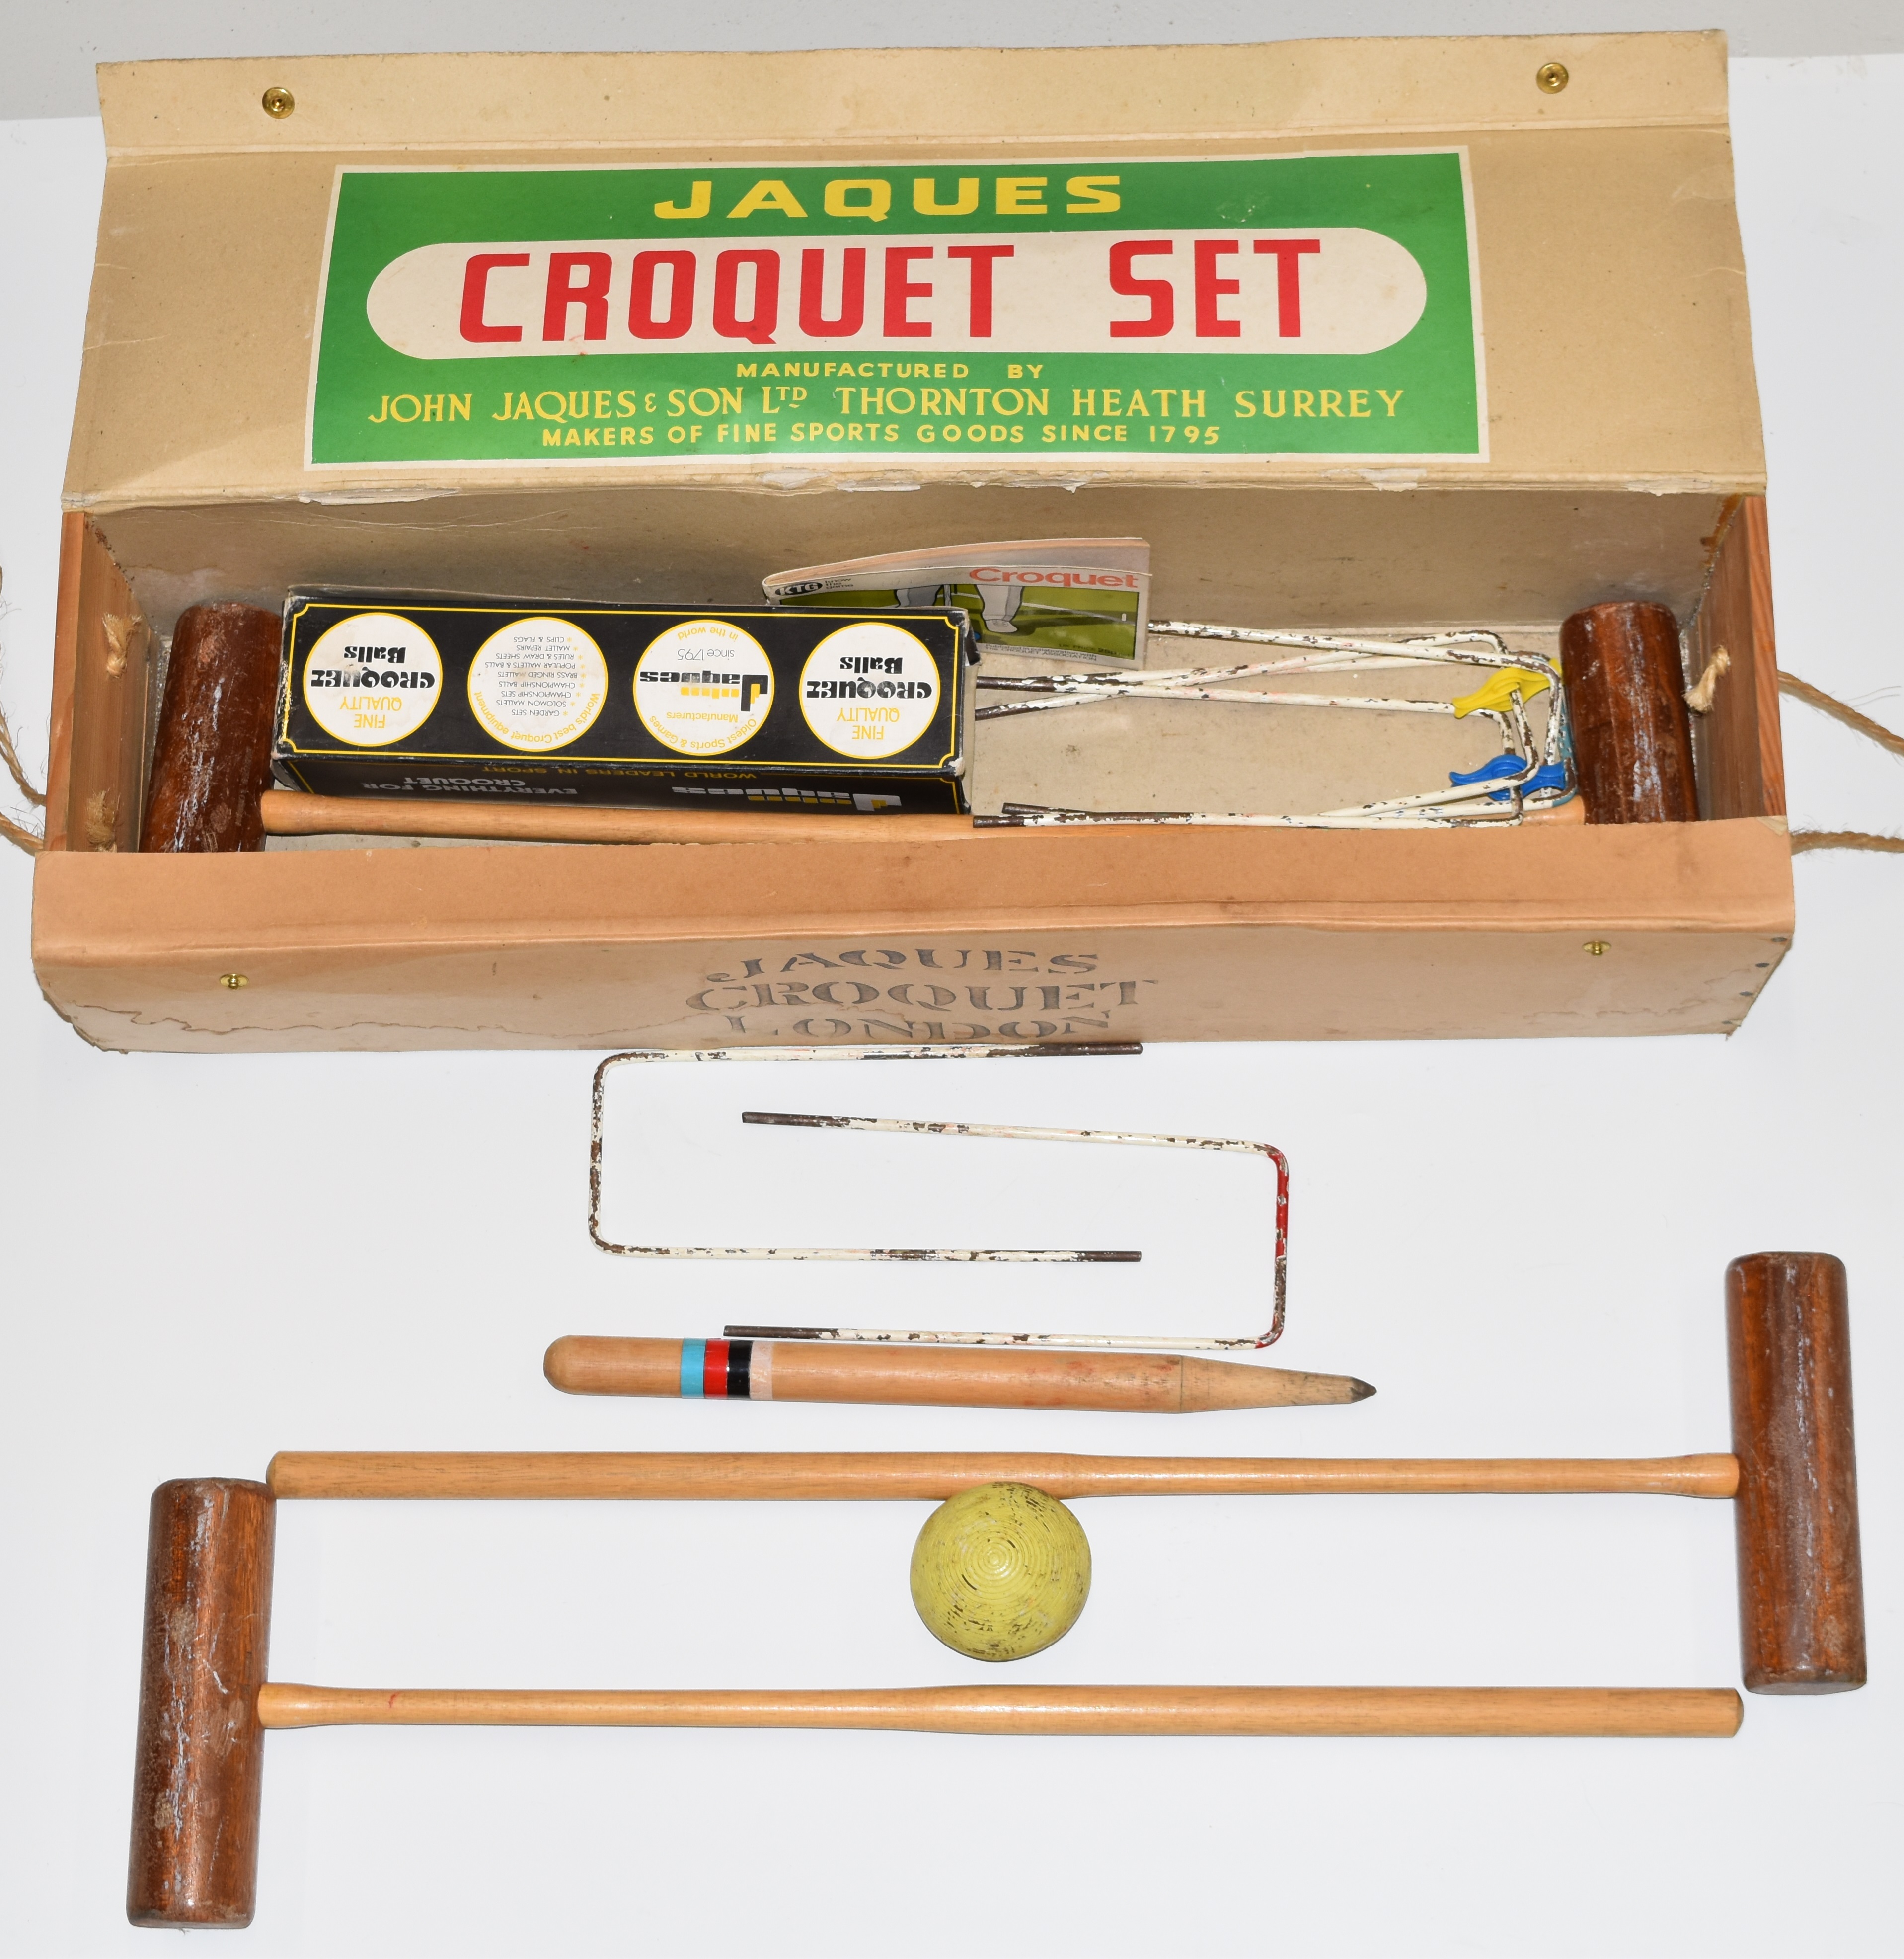 Jaques croquet set with four mallets, six hoops, clips, centre peg and balls, in original box - Image 2 of 3